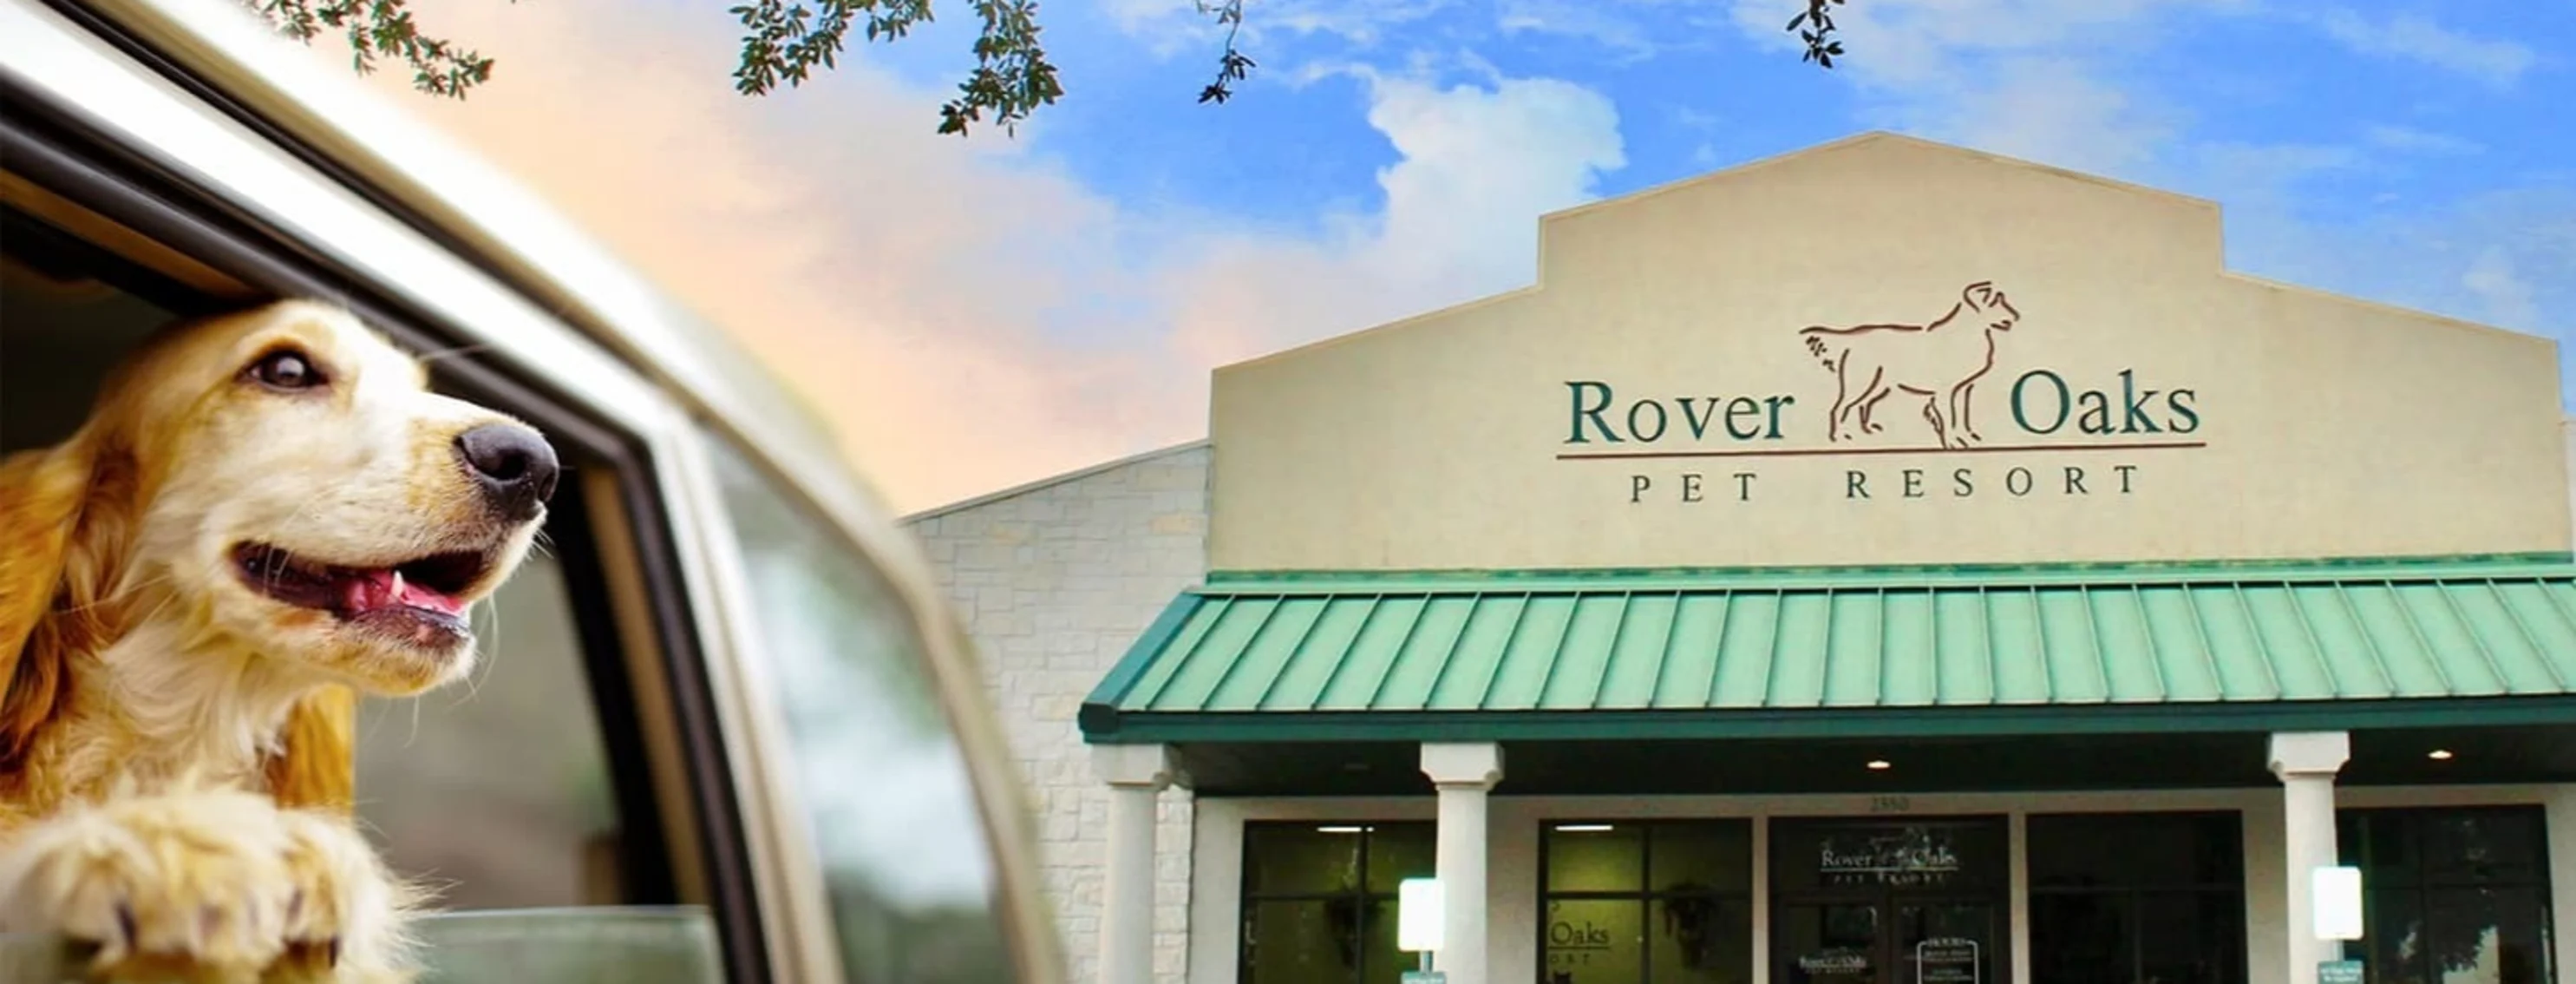 Rover Oaks exterior with dog in car